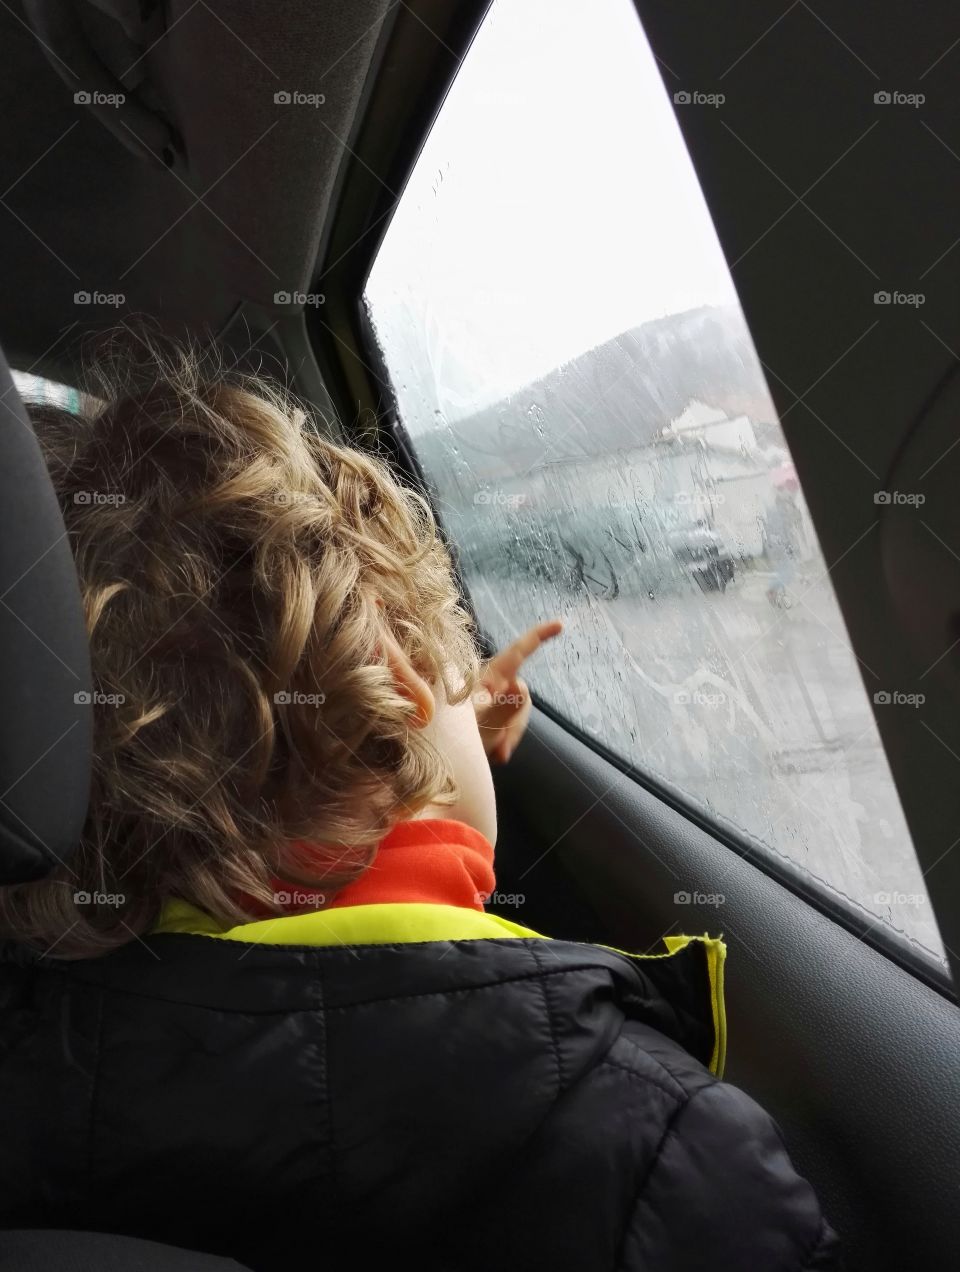 a kid drawing on a cars window